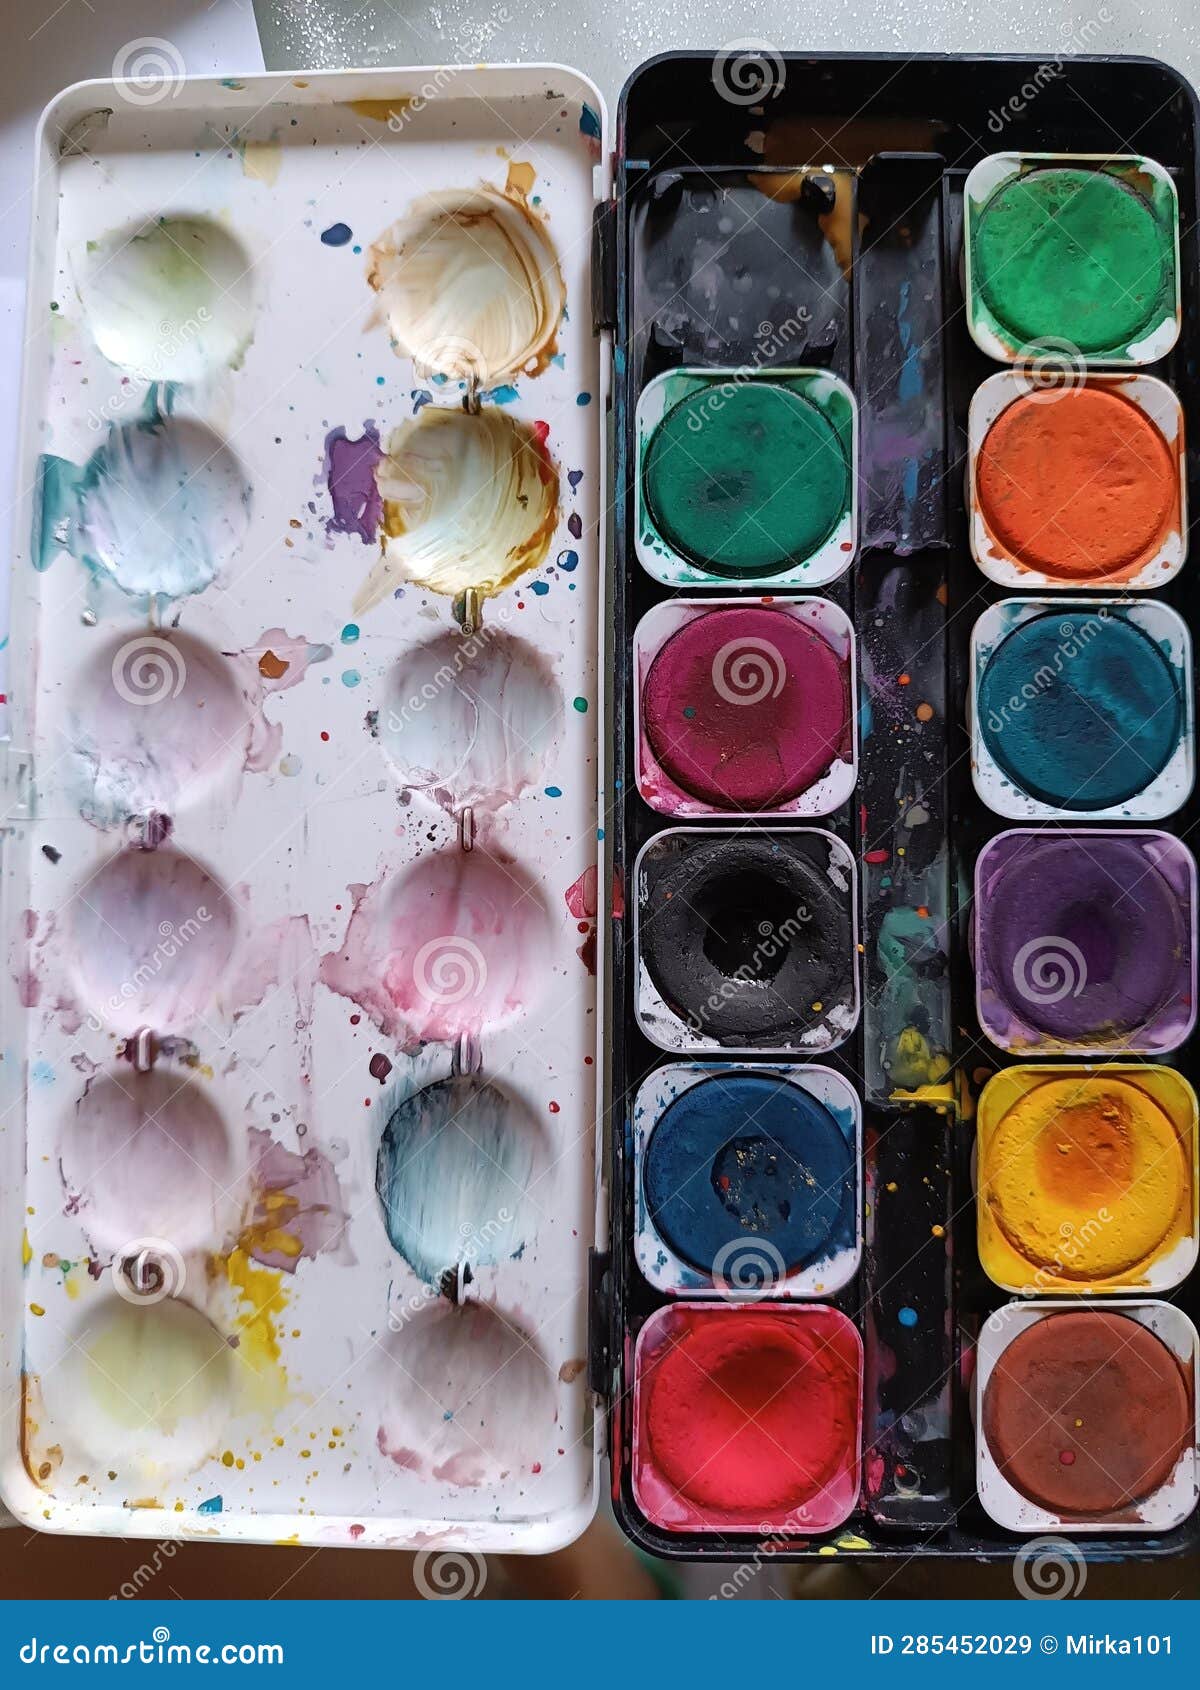 color stained watercolor box, creativity